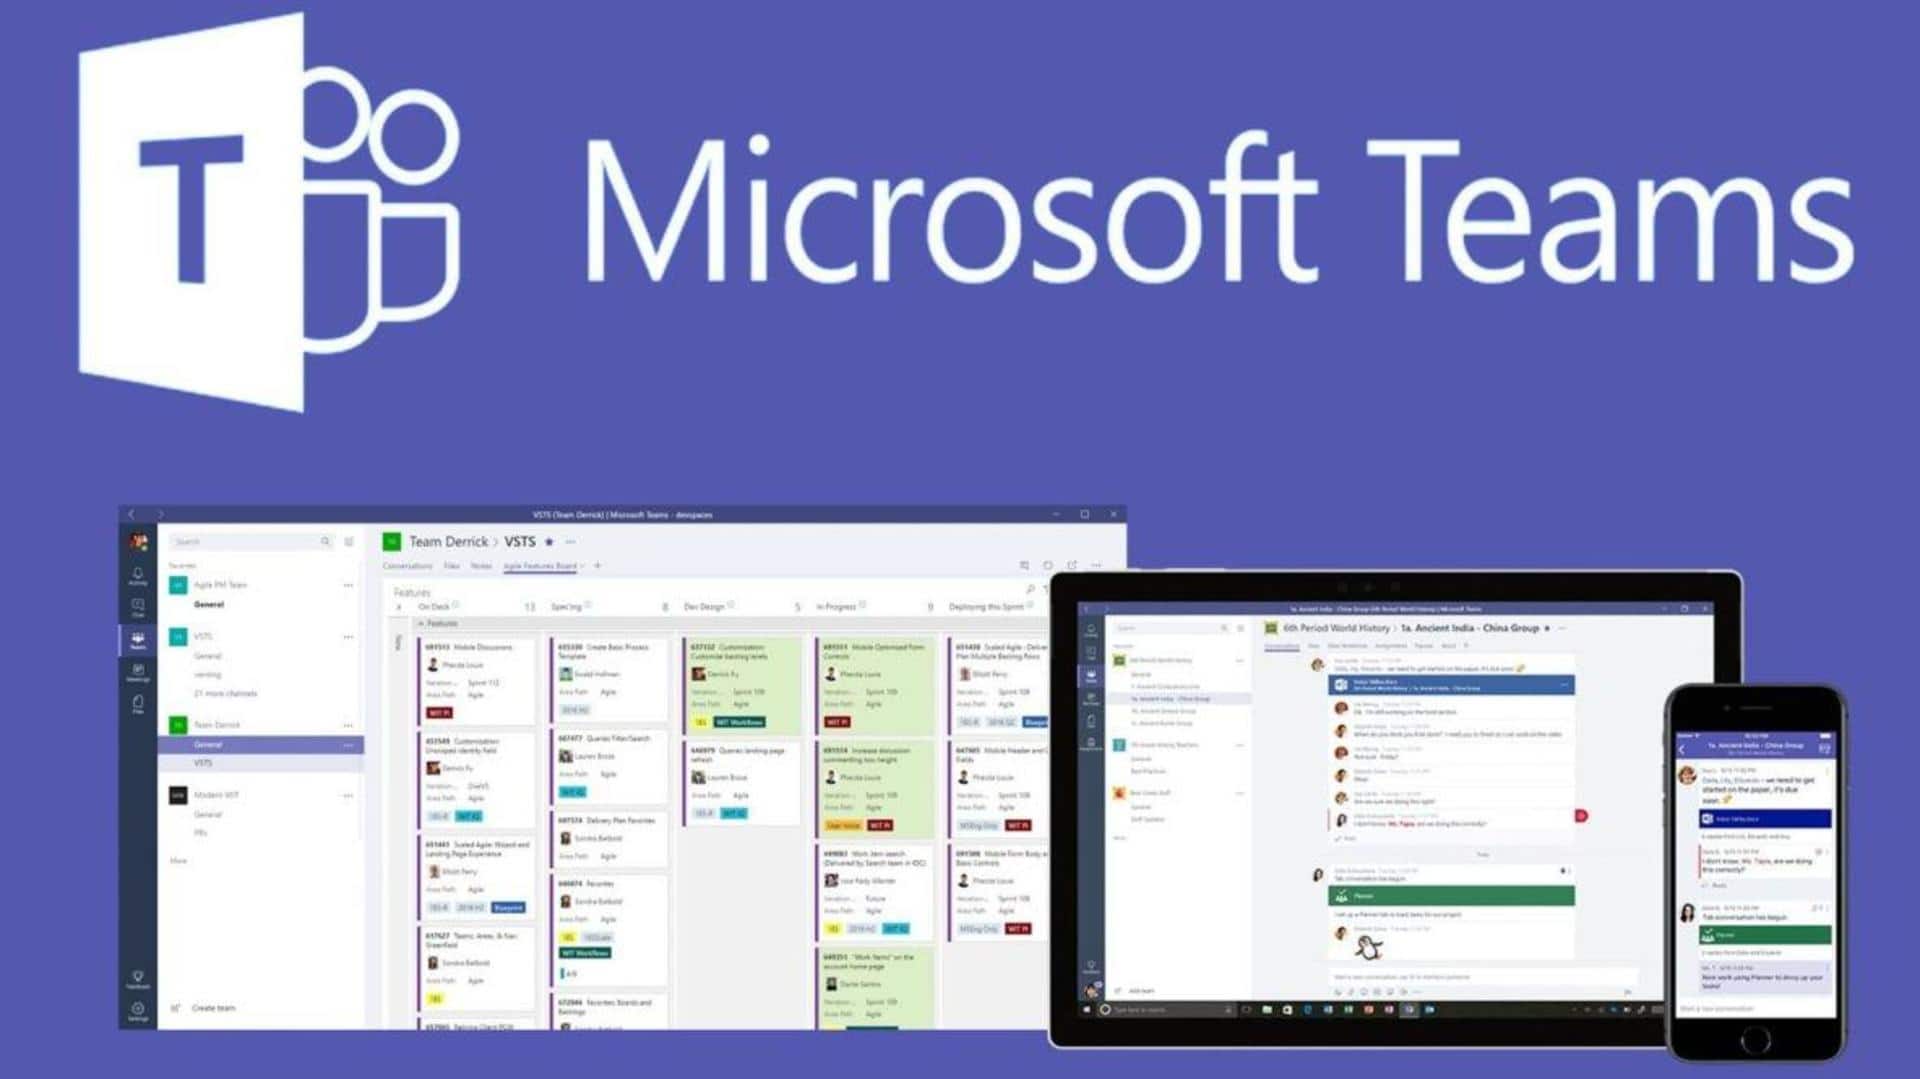 Microsoft Teams 2.0 is coming next month: What to expect